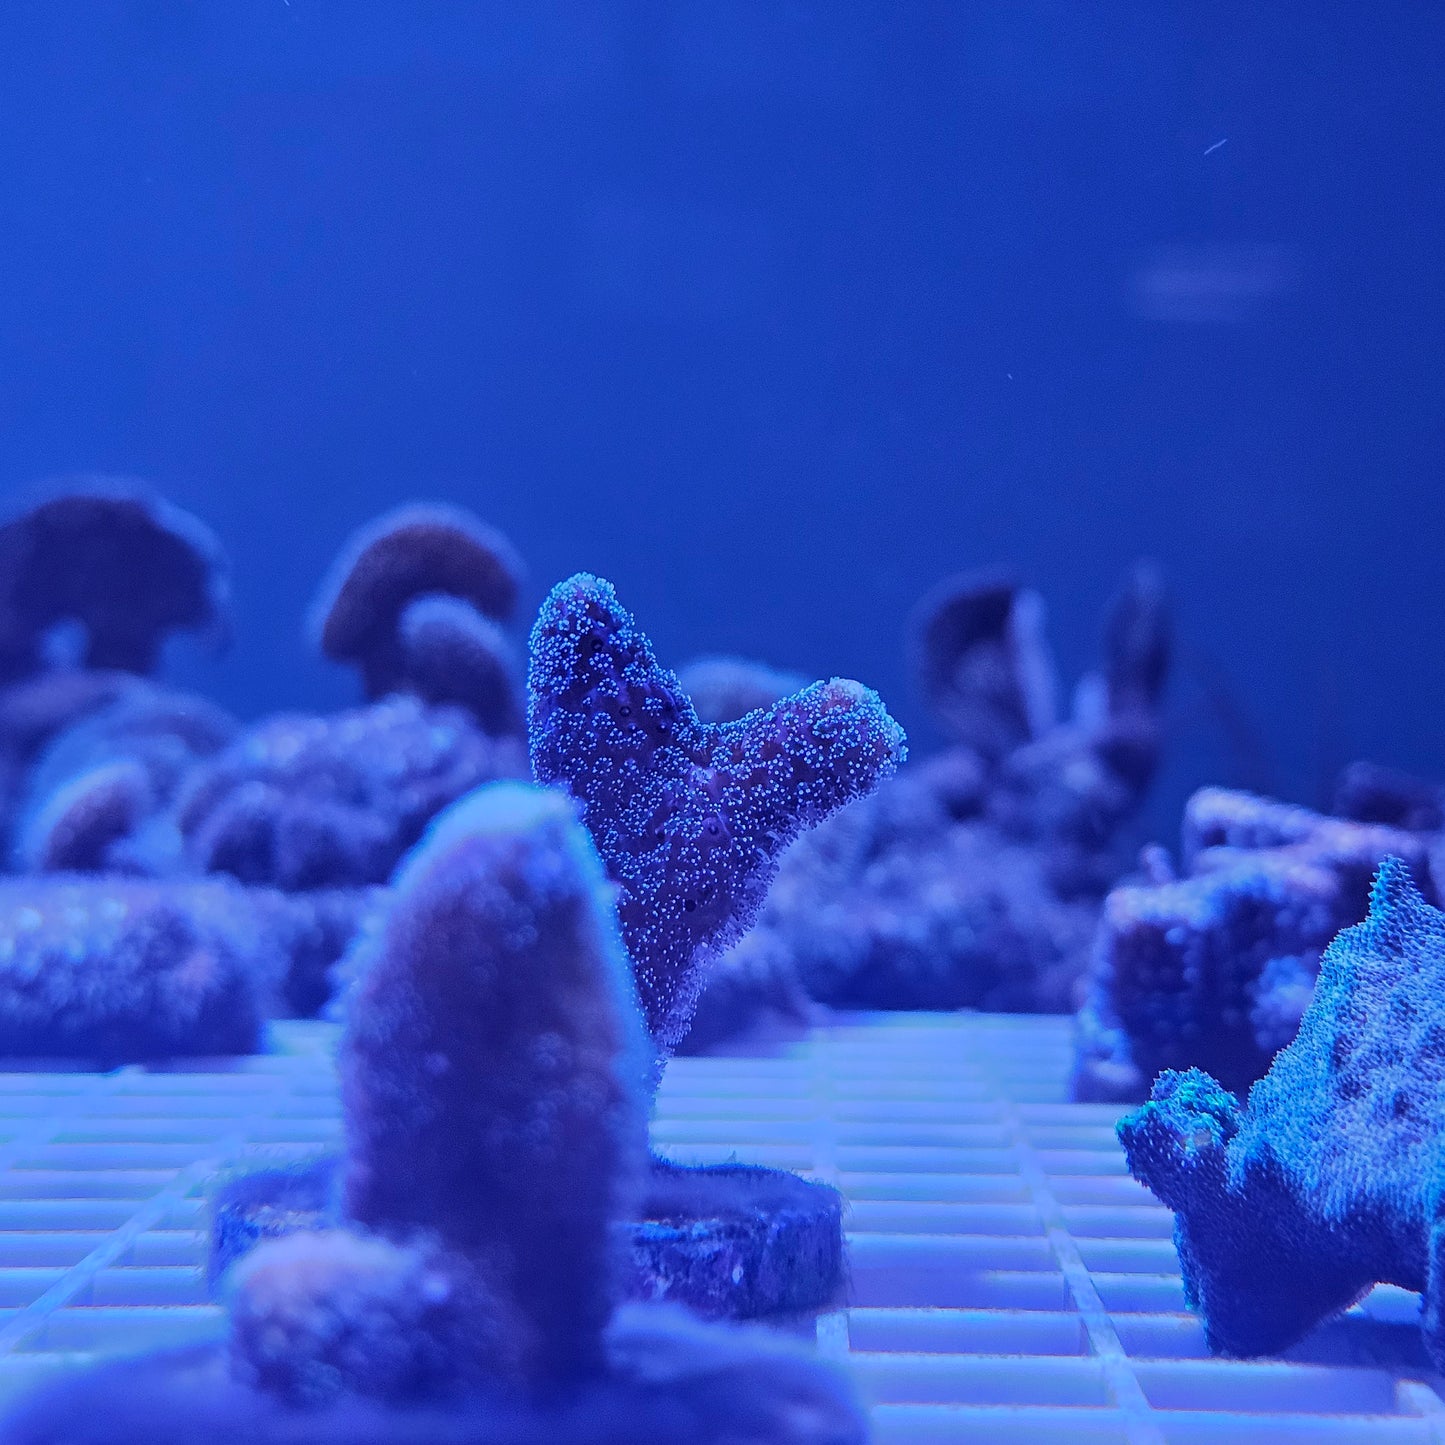 Green Stylo Coral Frag